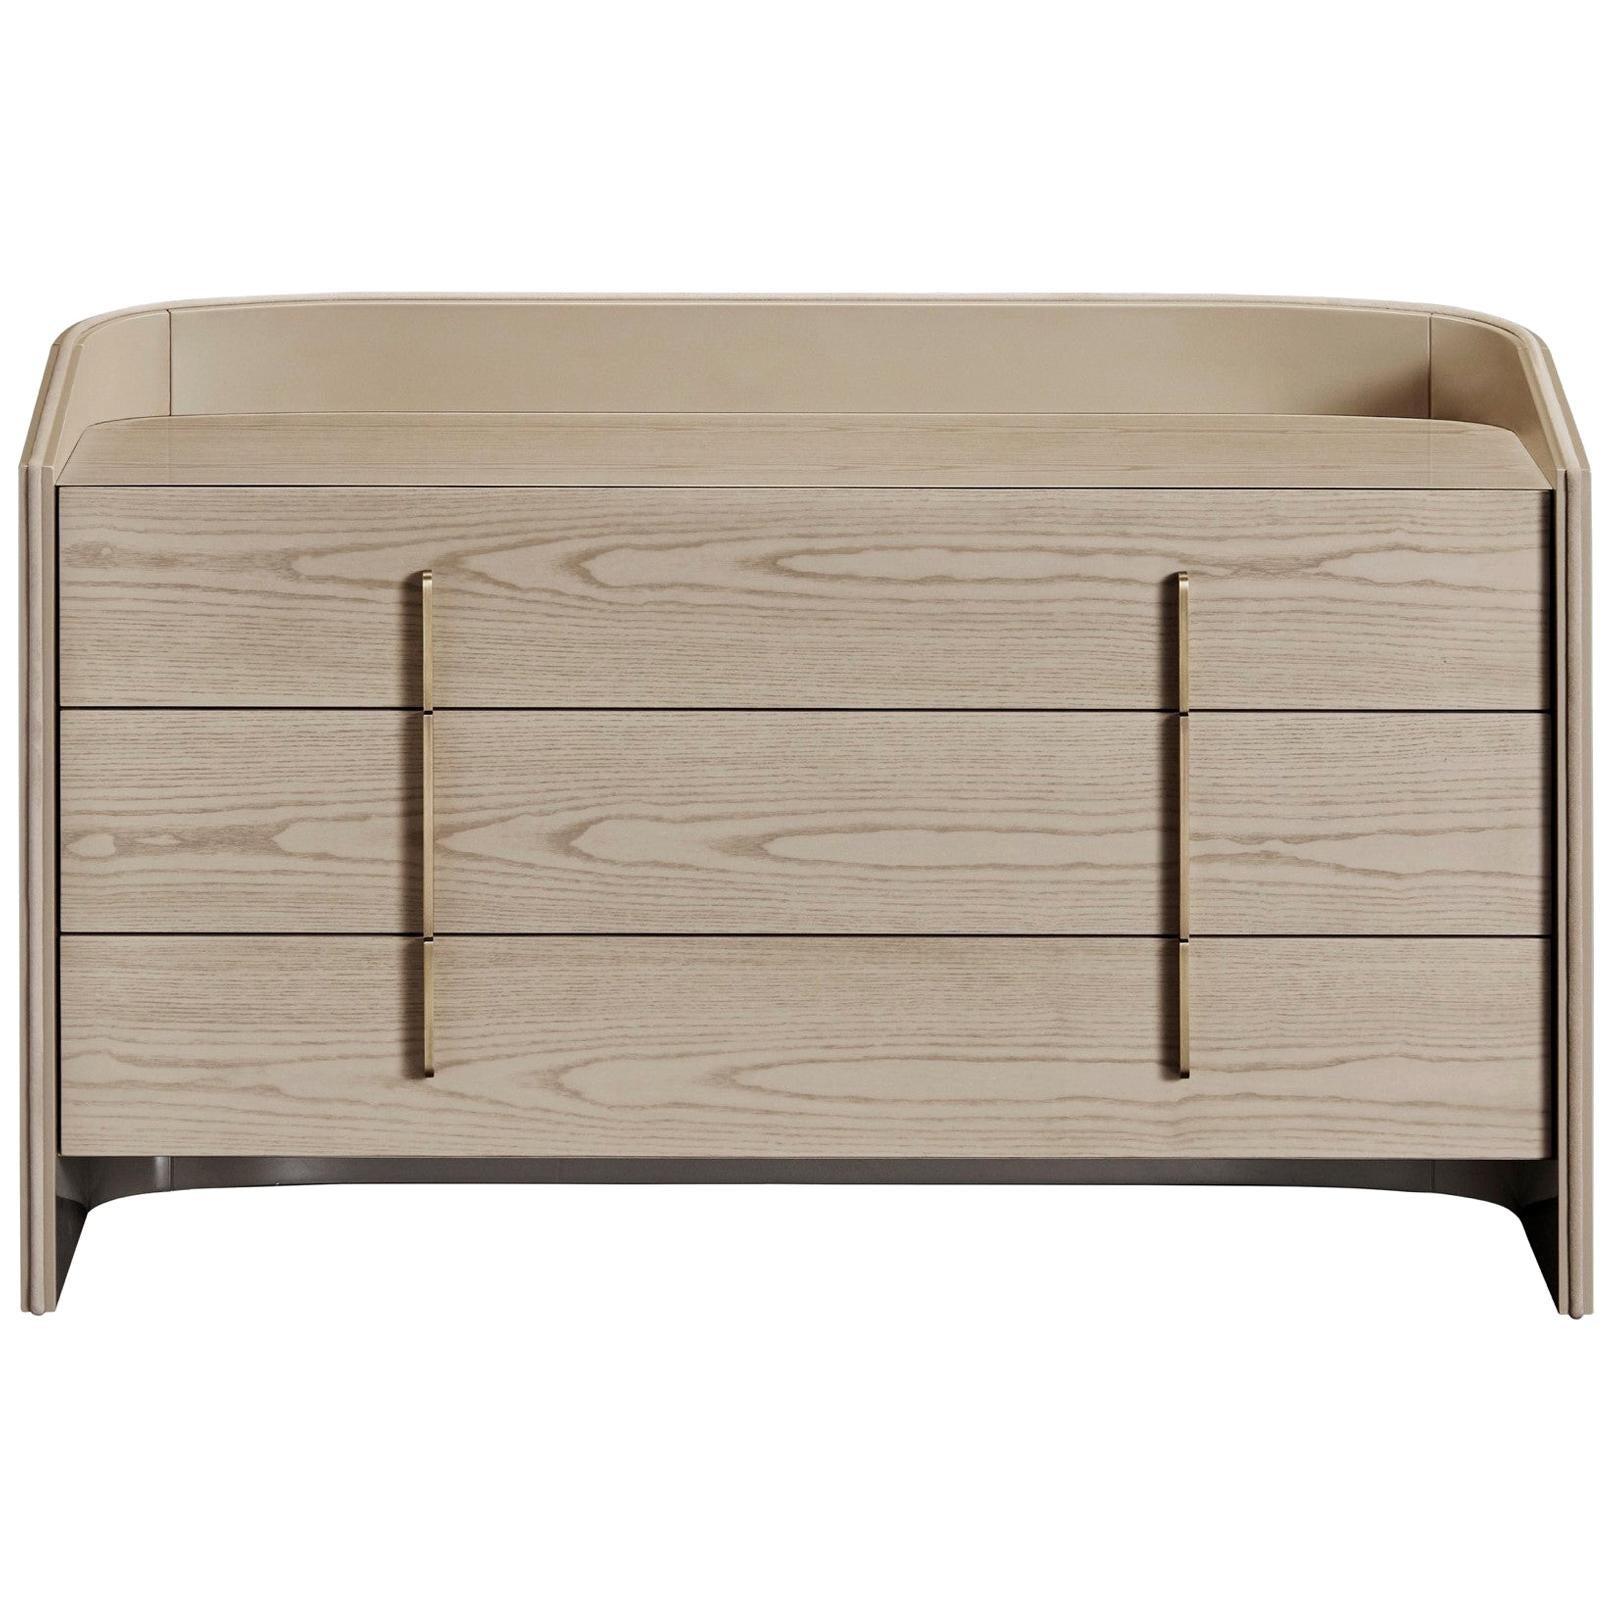 CORALINA Chest of Drawers in Ash Avelana and Antique Brass handles For Sale